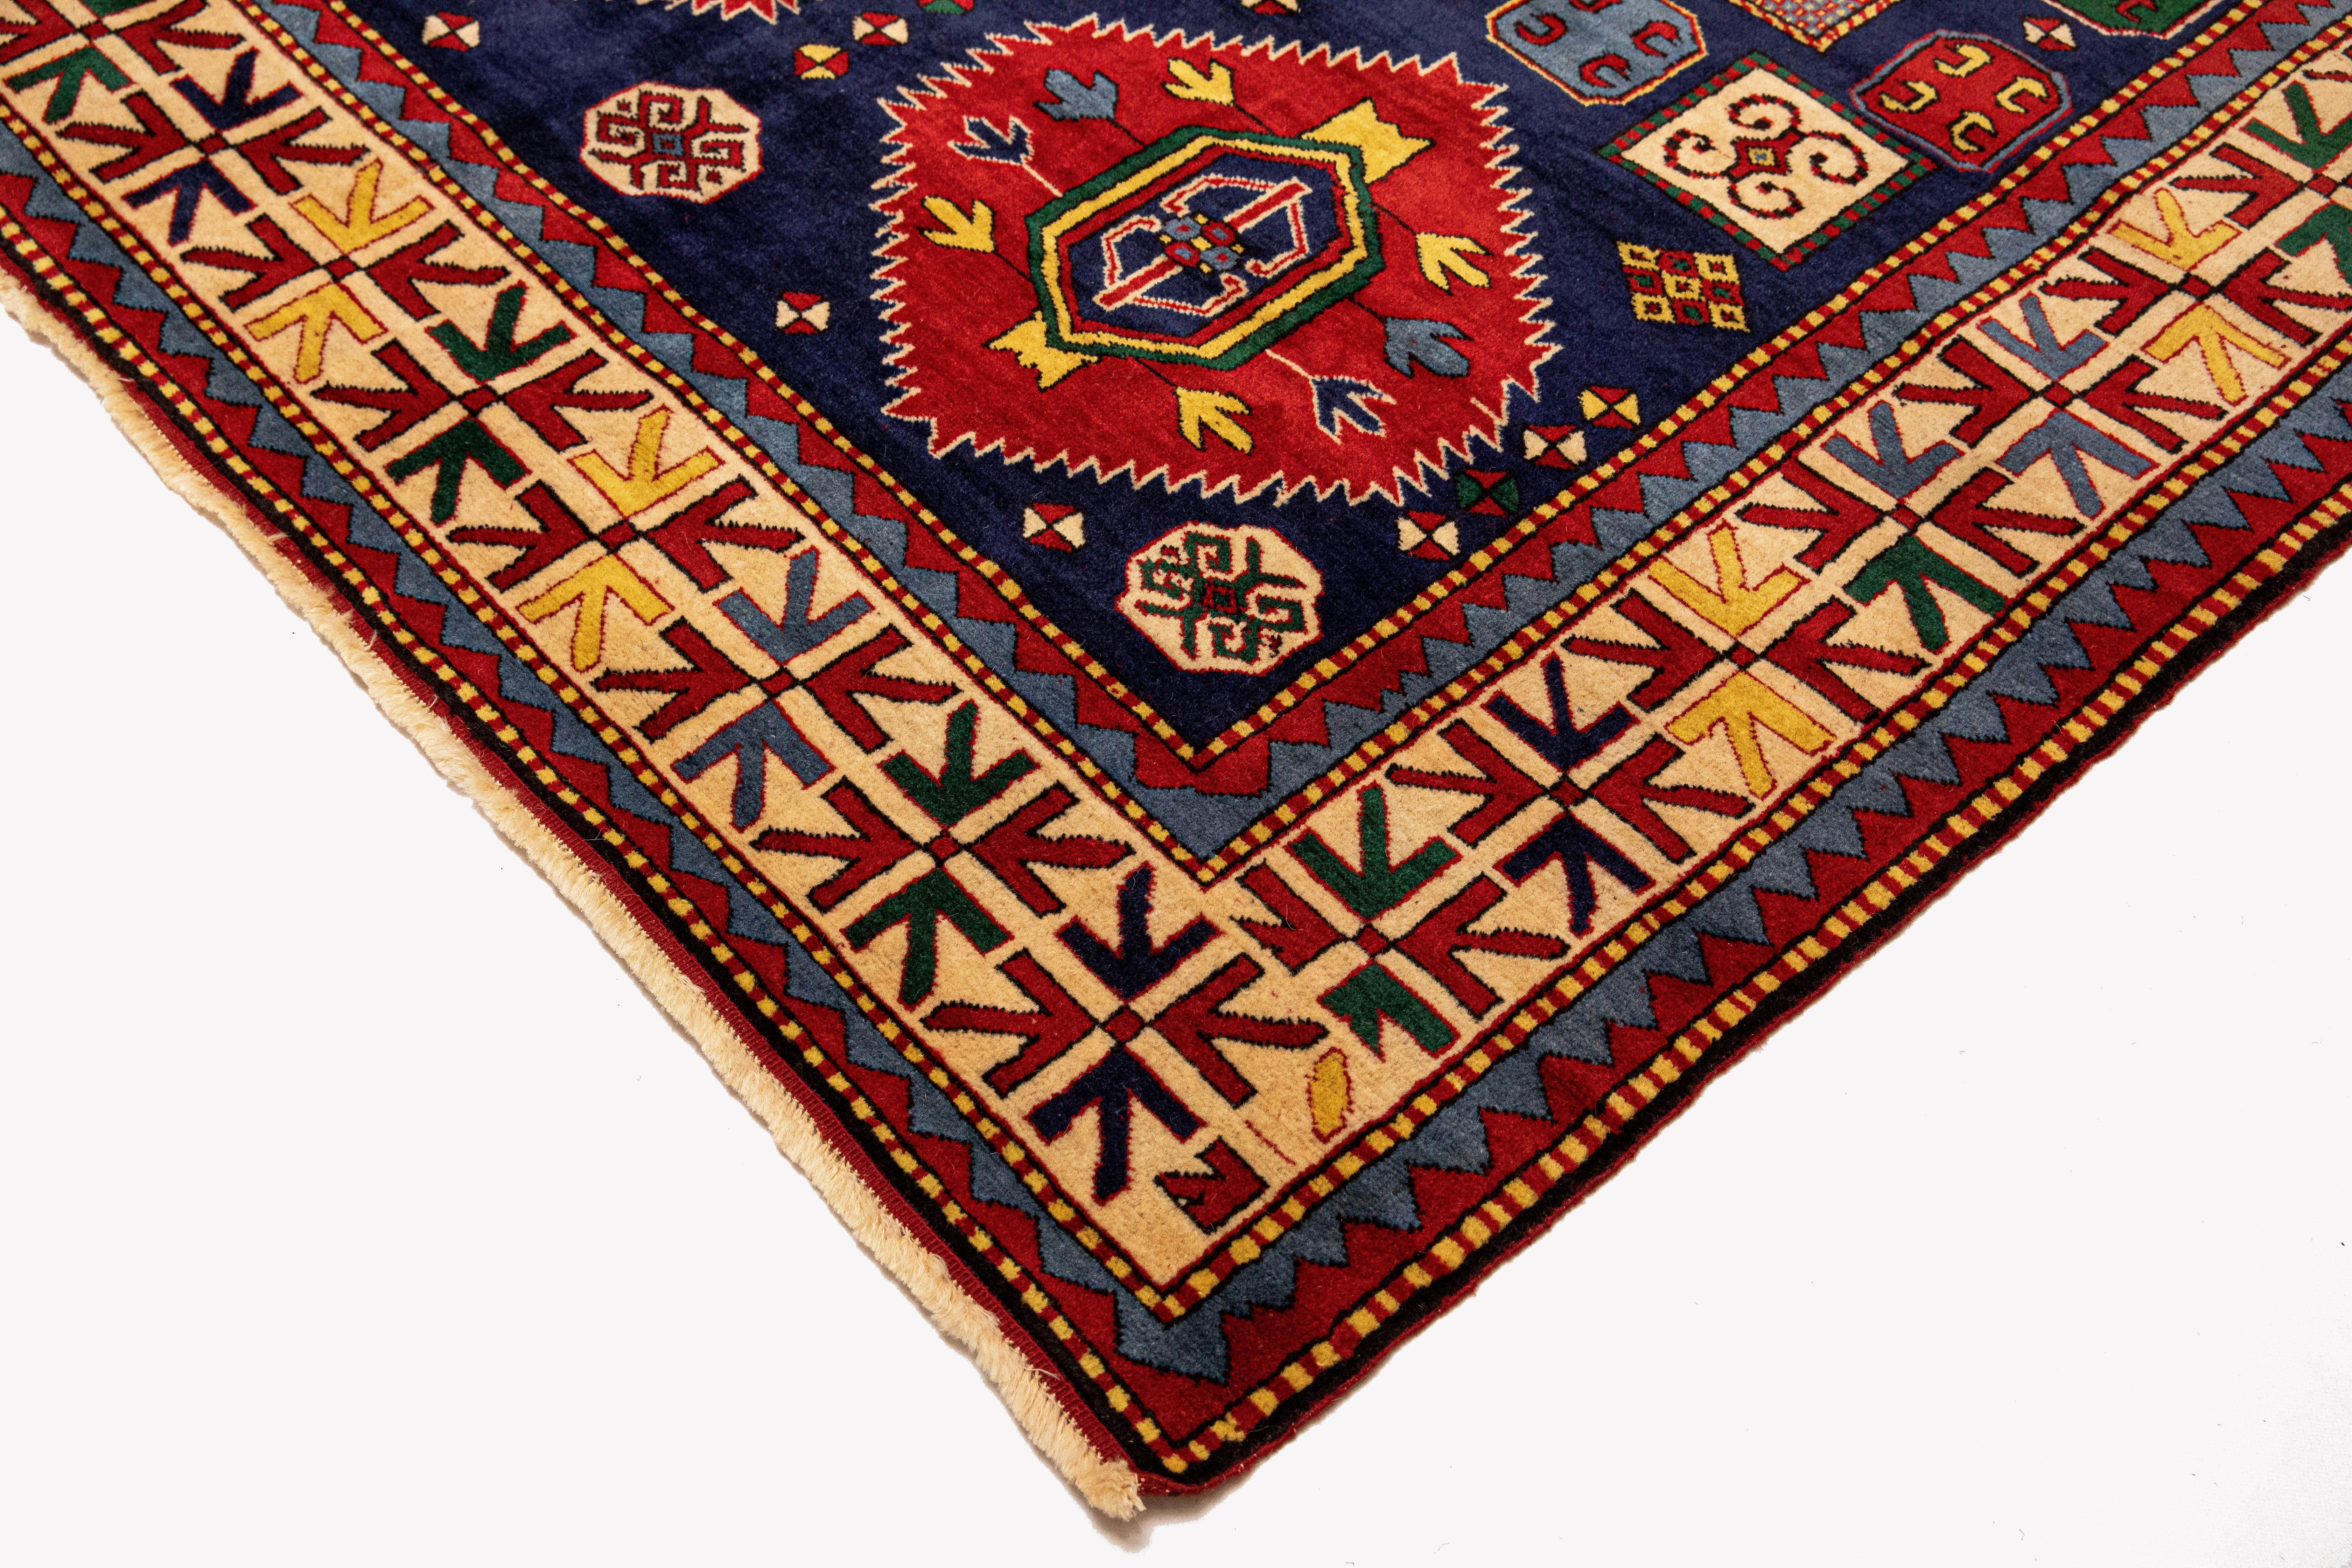 This is an exceptional rug, brand new, and made under special circumstances . Let us tell you briefly the back story.
Modern day Azerbaijan with its many mountains and valleys, as in past centuries is a mosaic of different tribal peoples, isolated